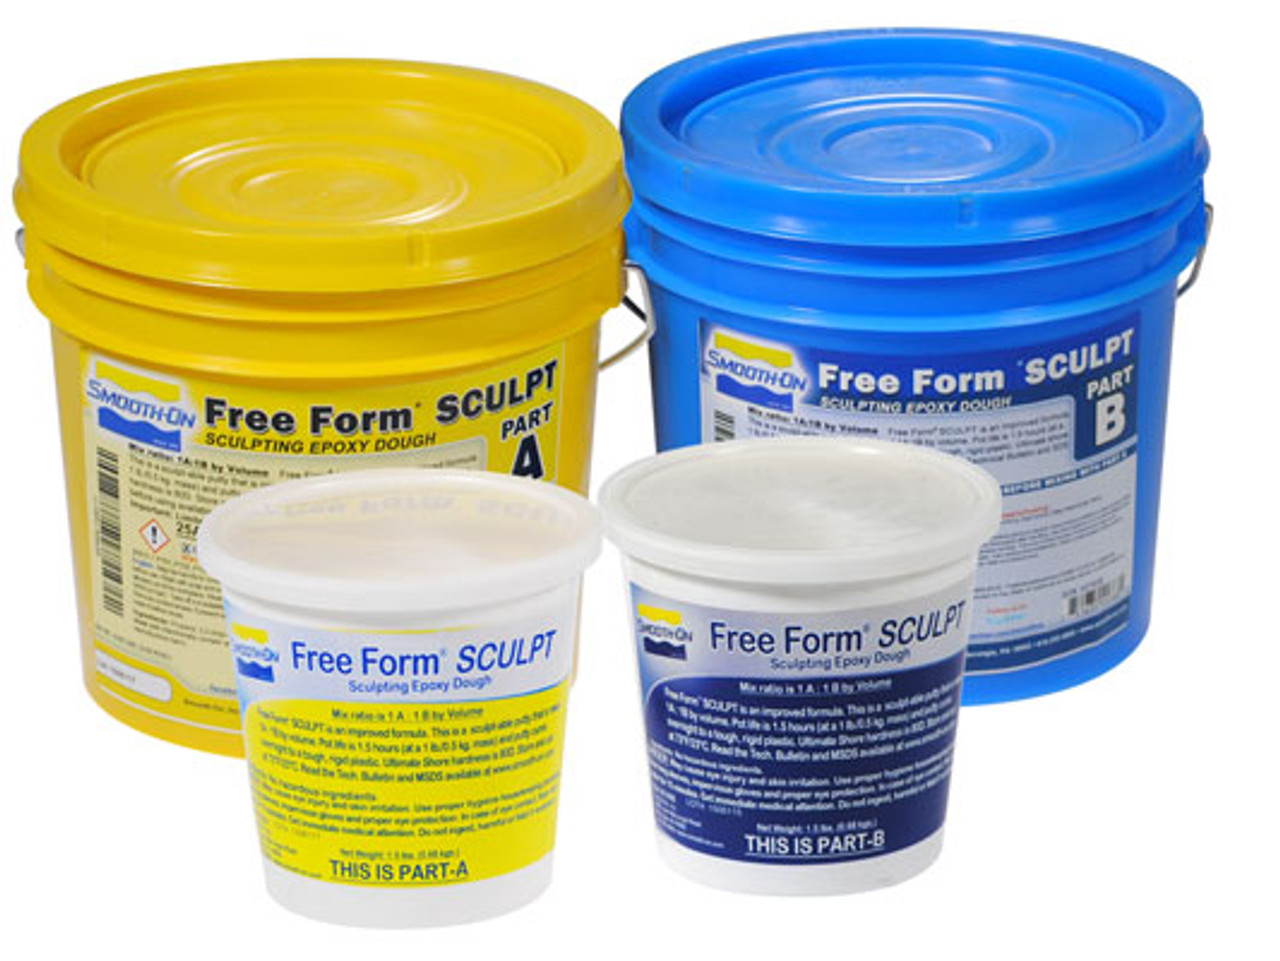 Fixit Sculpt 1 Lb. Epoxy Clay -Two Part Kit of All Purpose